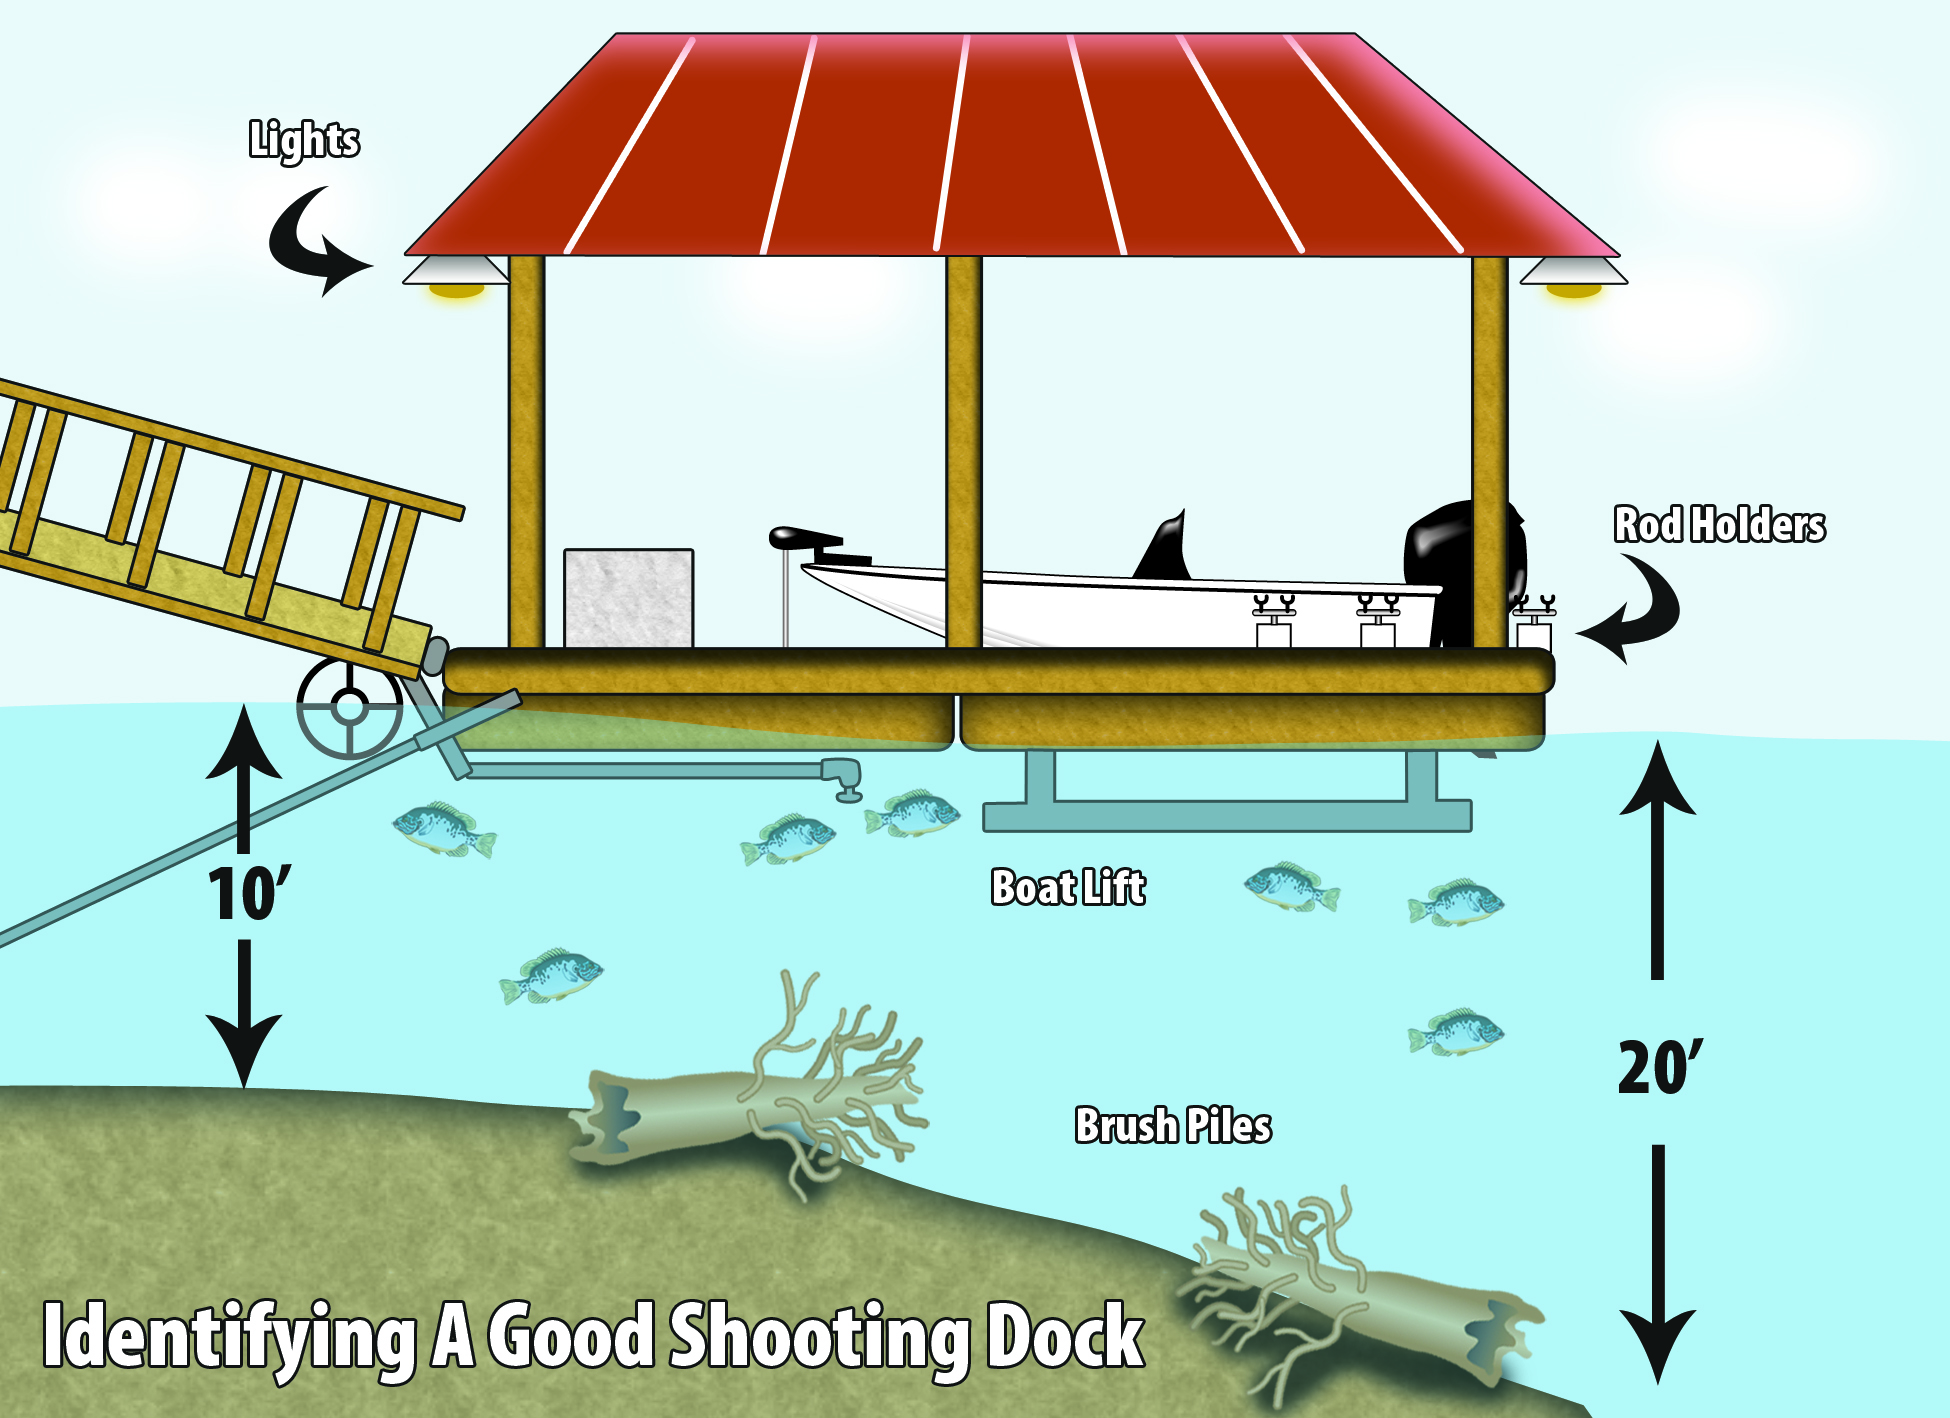 How to shoot docks for crappie